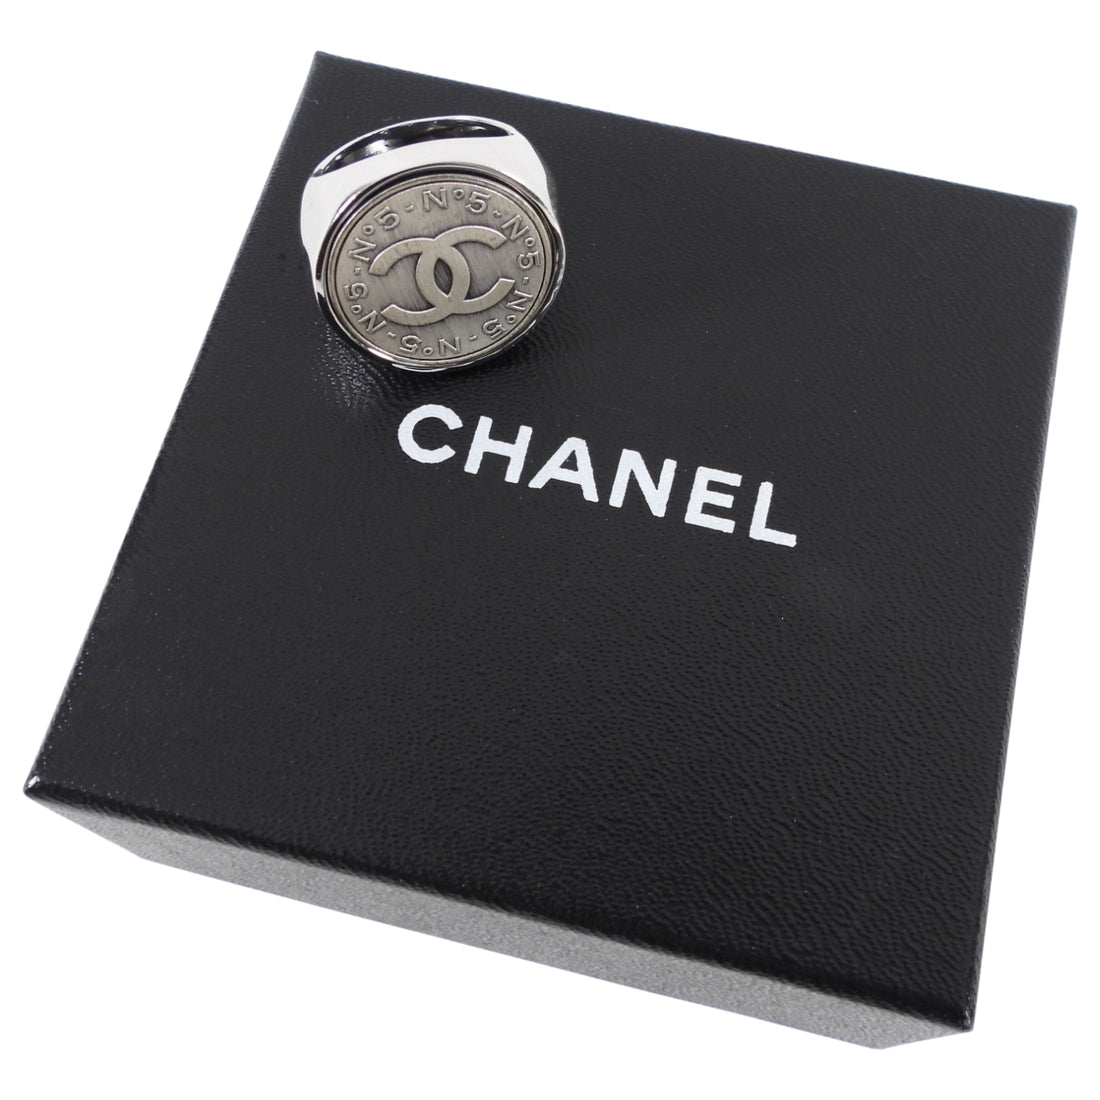 CHANEL, Jewelry, Chanel Resin Crystal Cc Logo Heart Ring